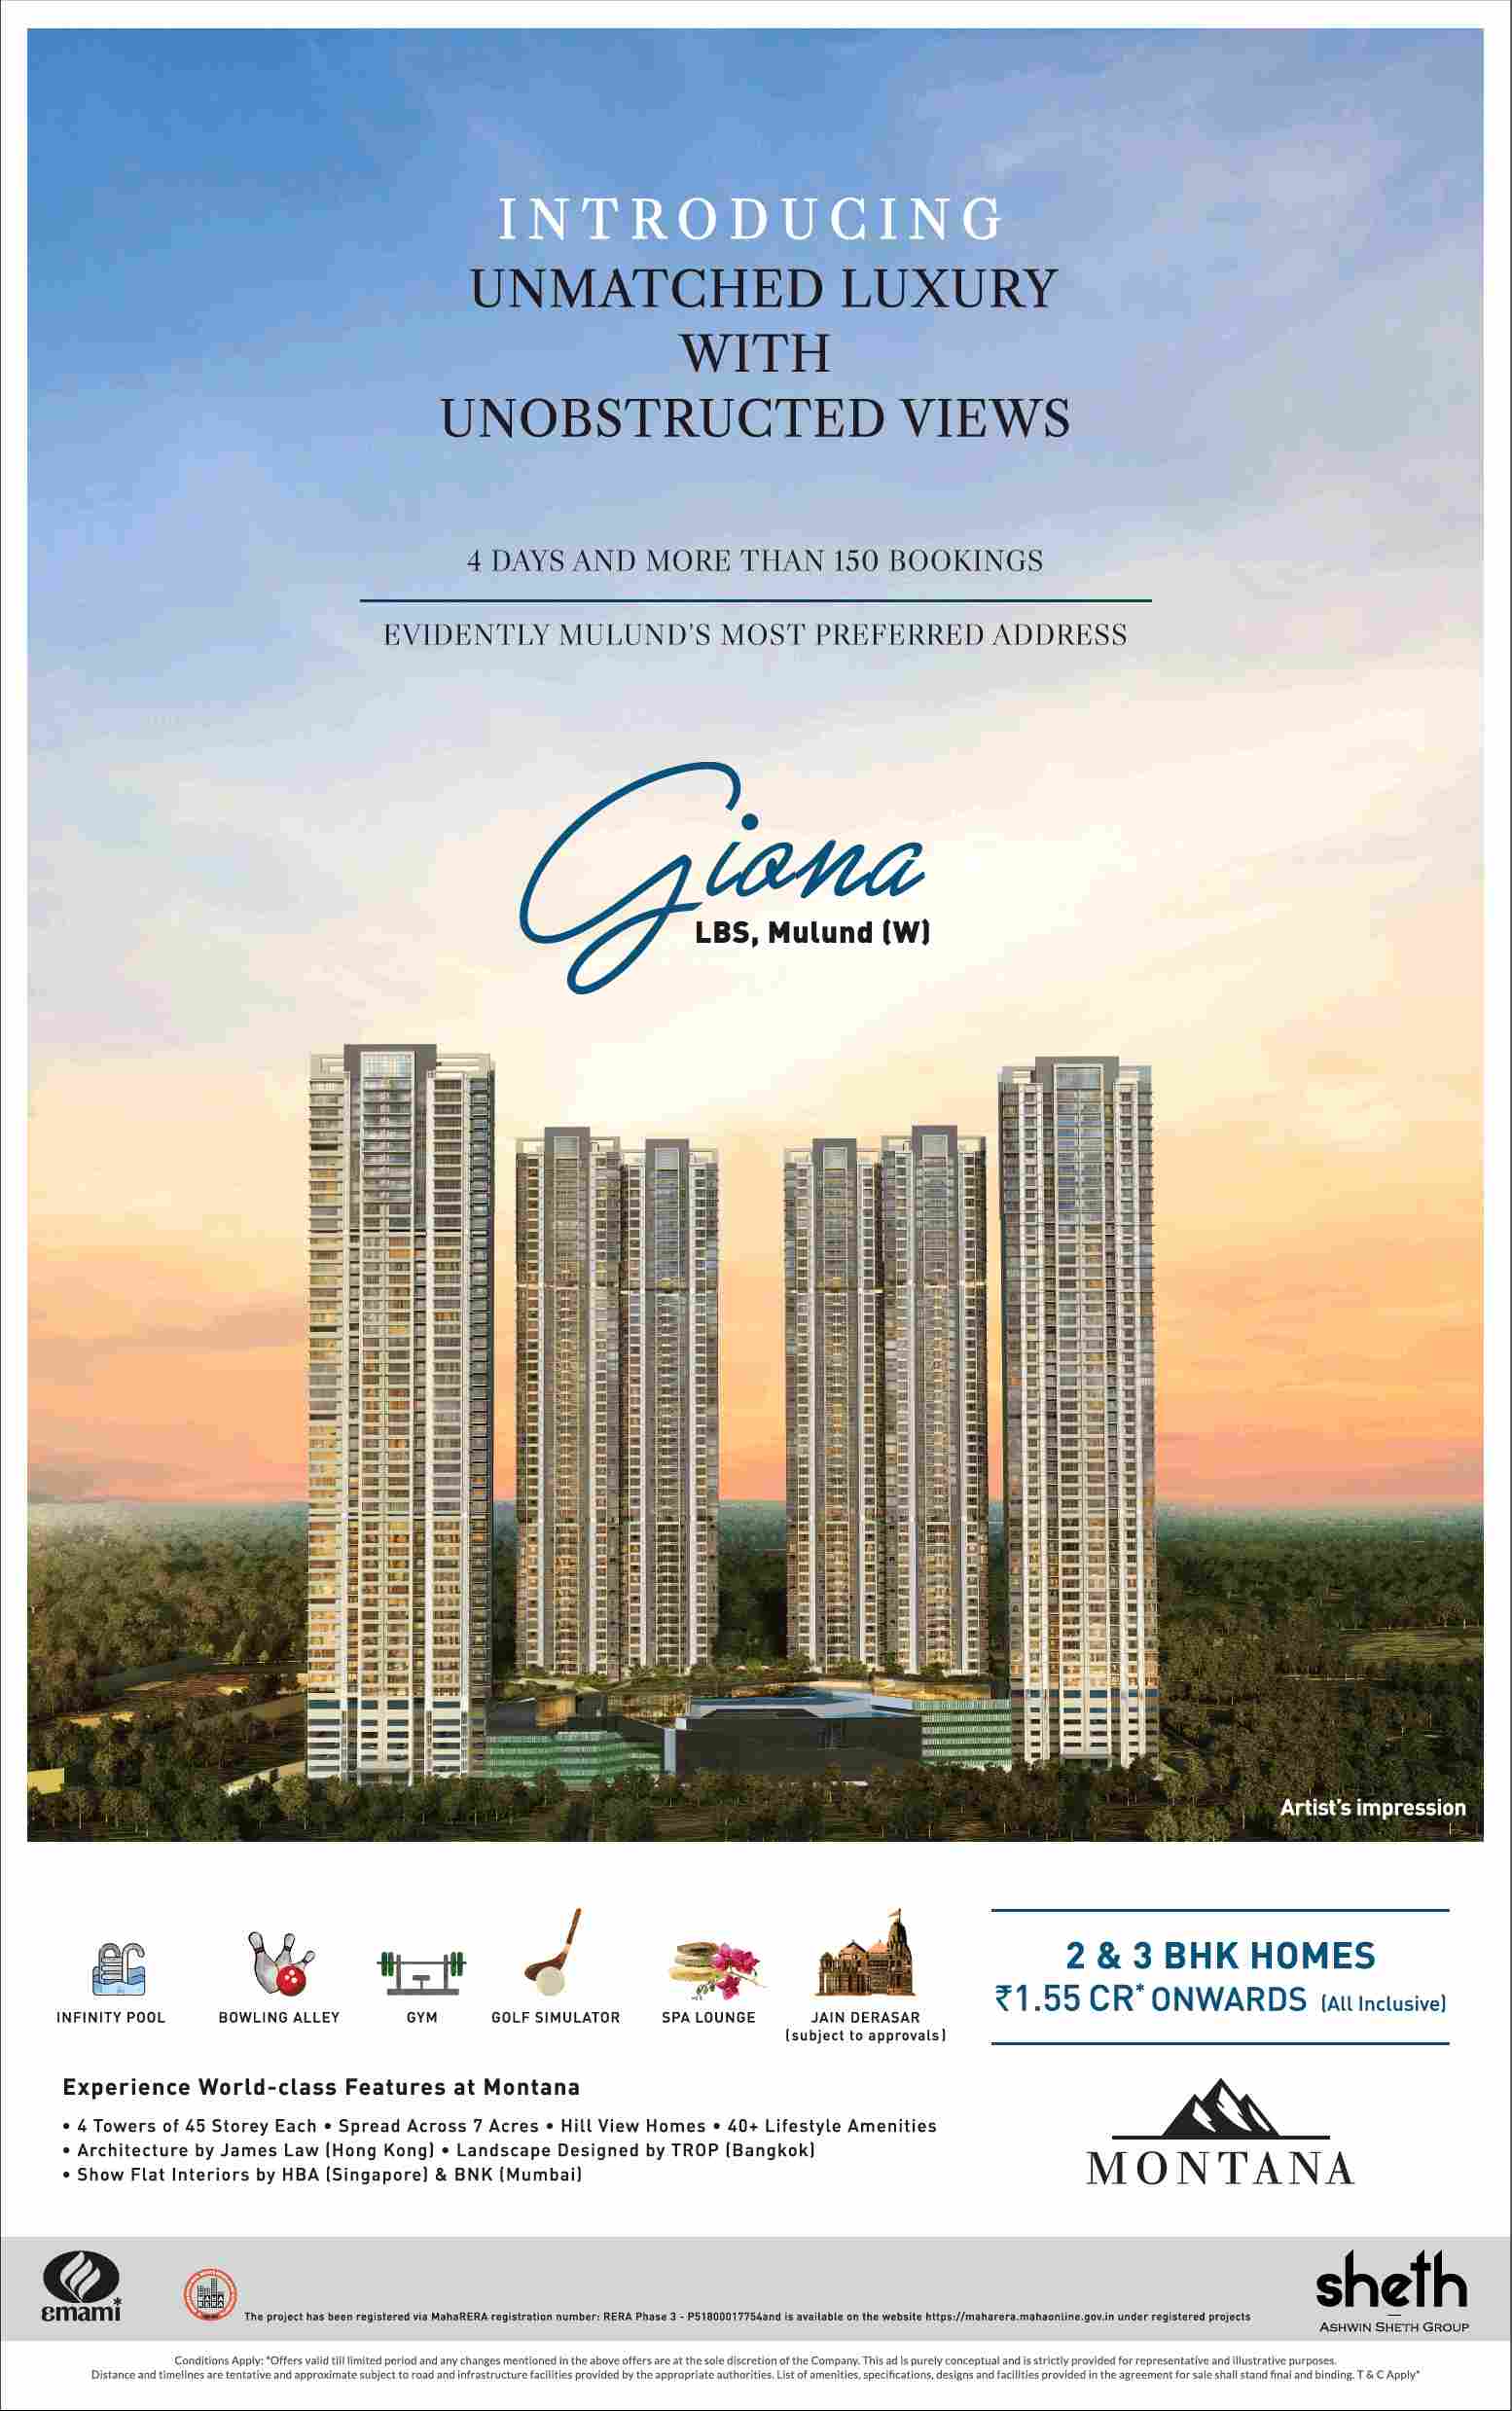 Introducing unmatched luxury with unobstructed views at Sheth Montana in Mumbai